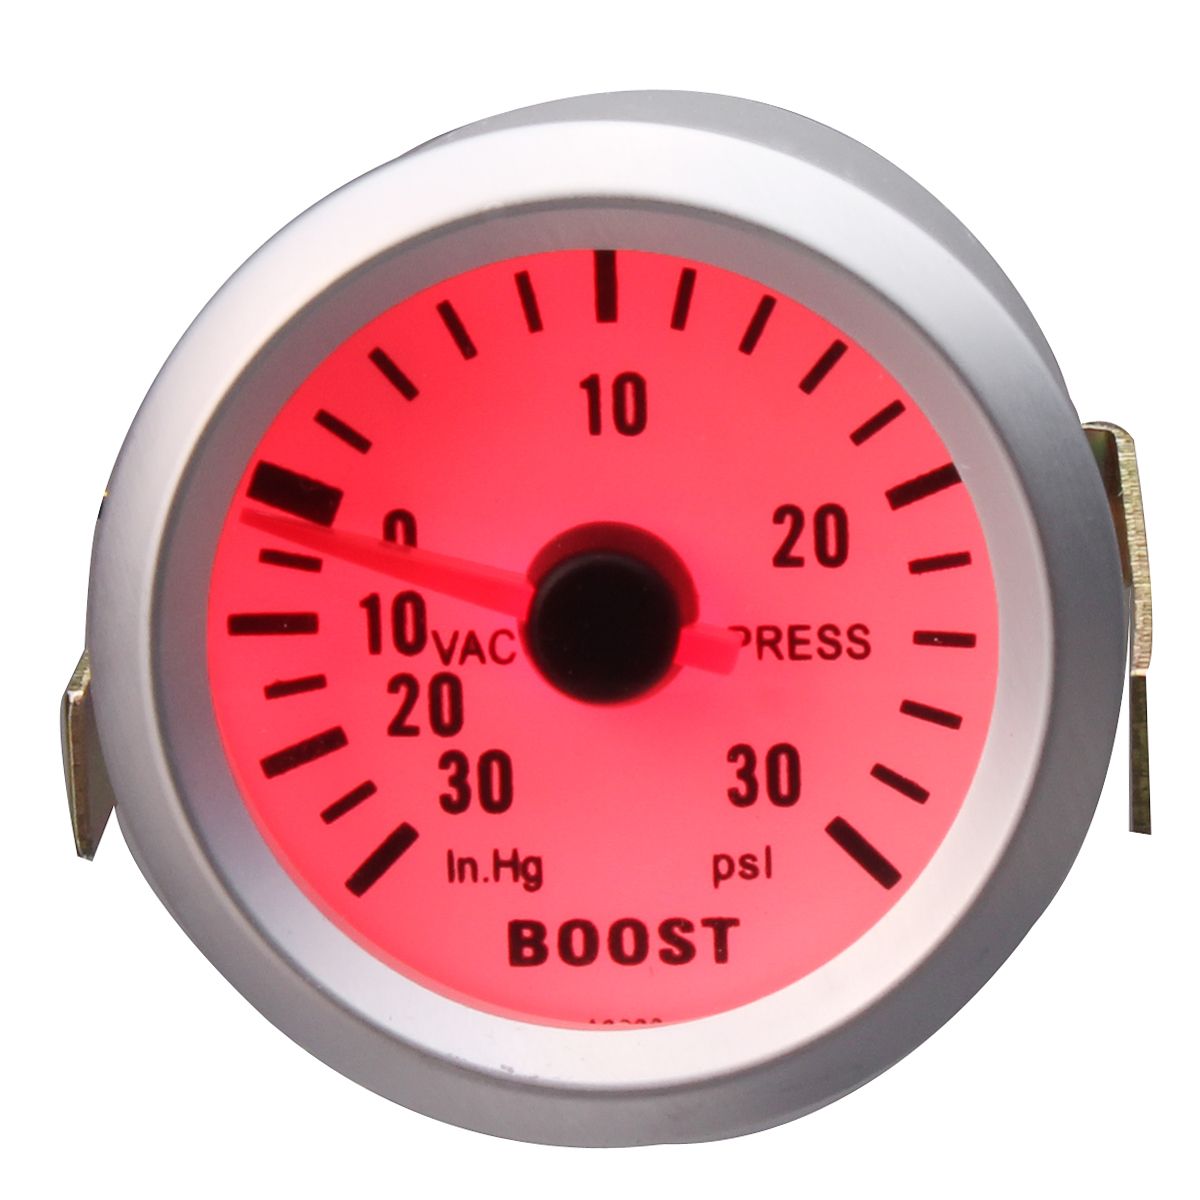 2-inch-52mm-Universal-Car-Red-LED-Pressure-Turbo-Boost-Gauge-Meter-30-Psi-with-Hose-1267991